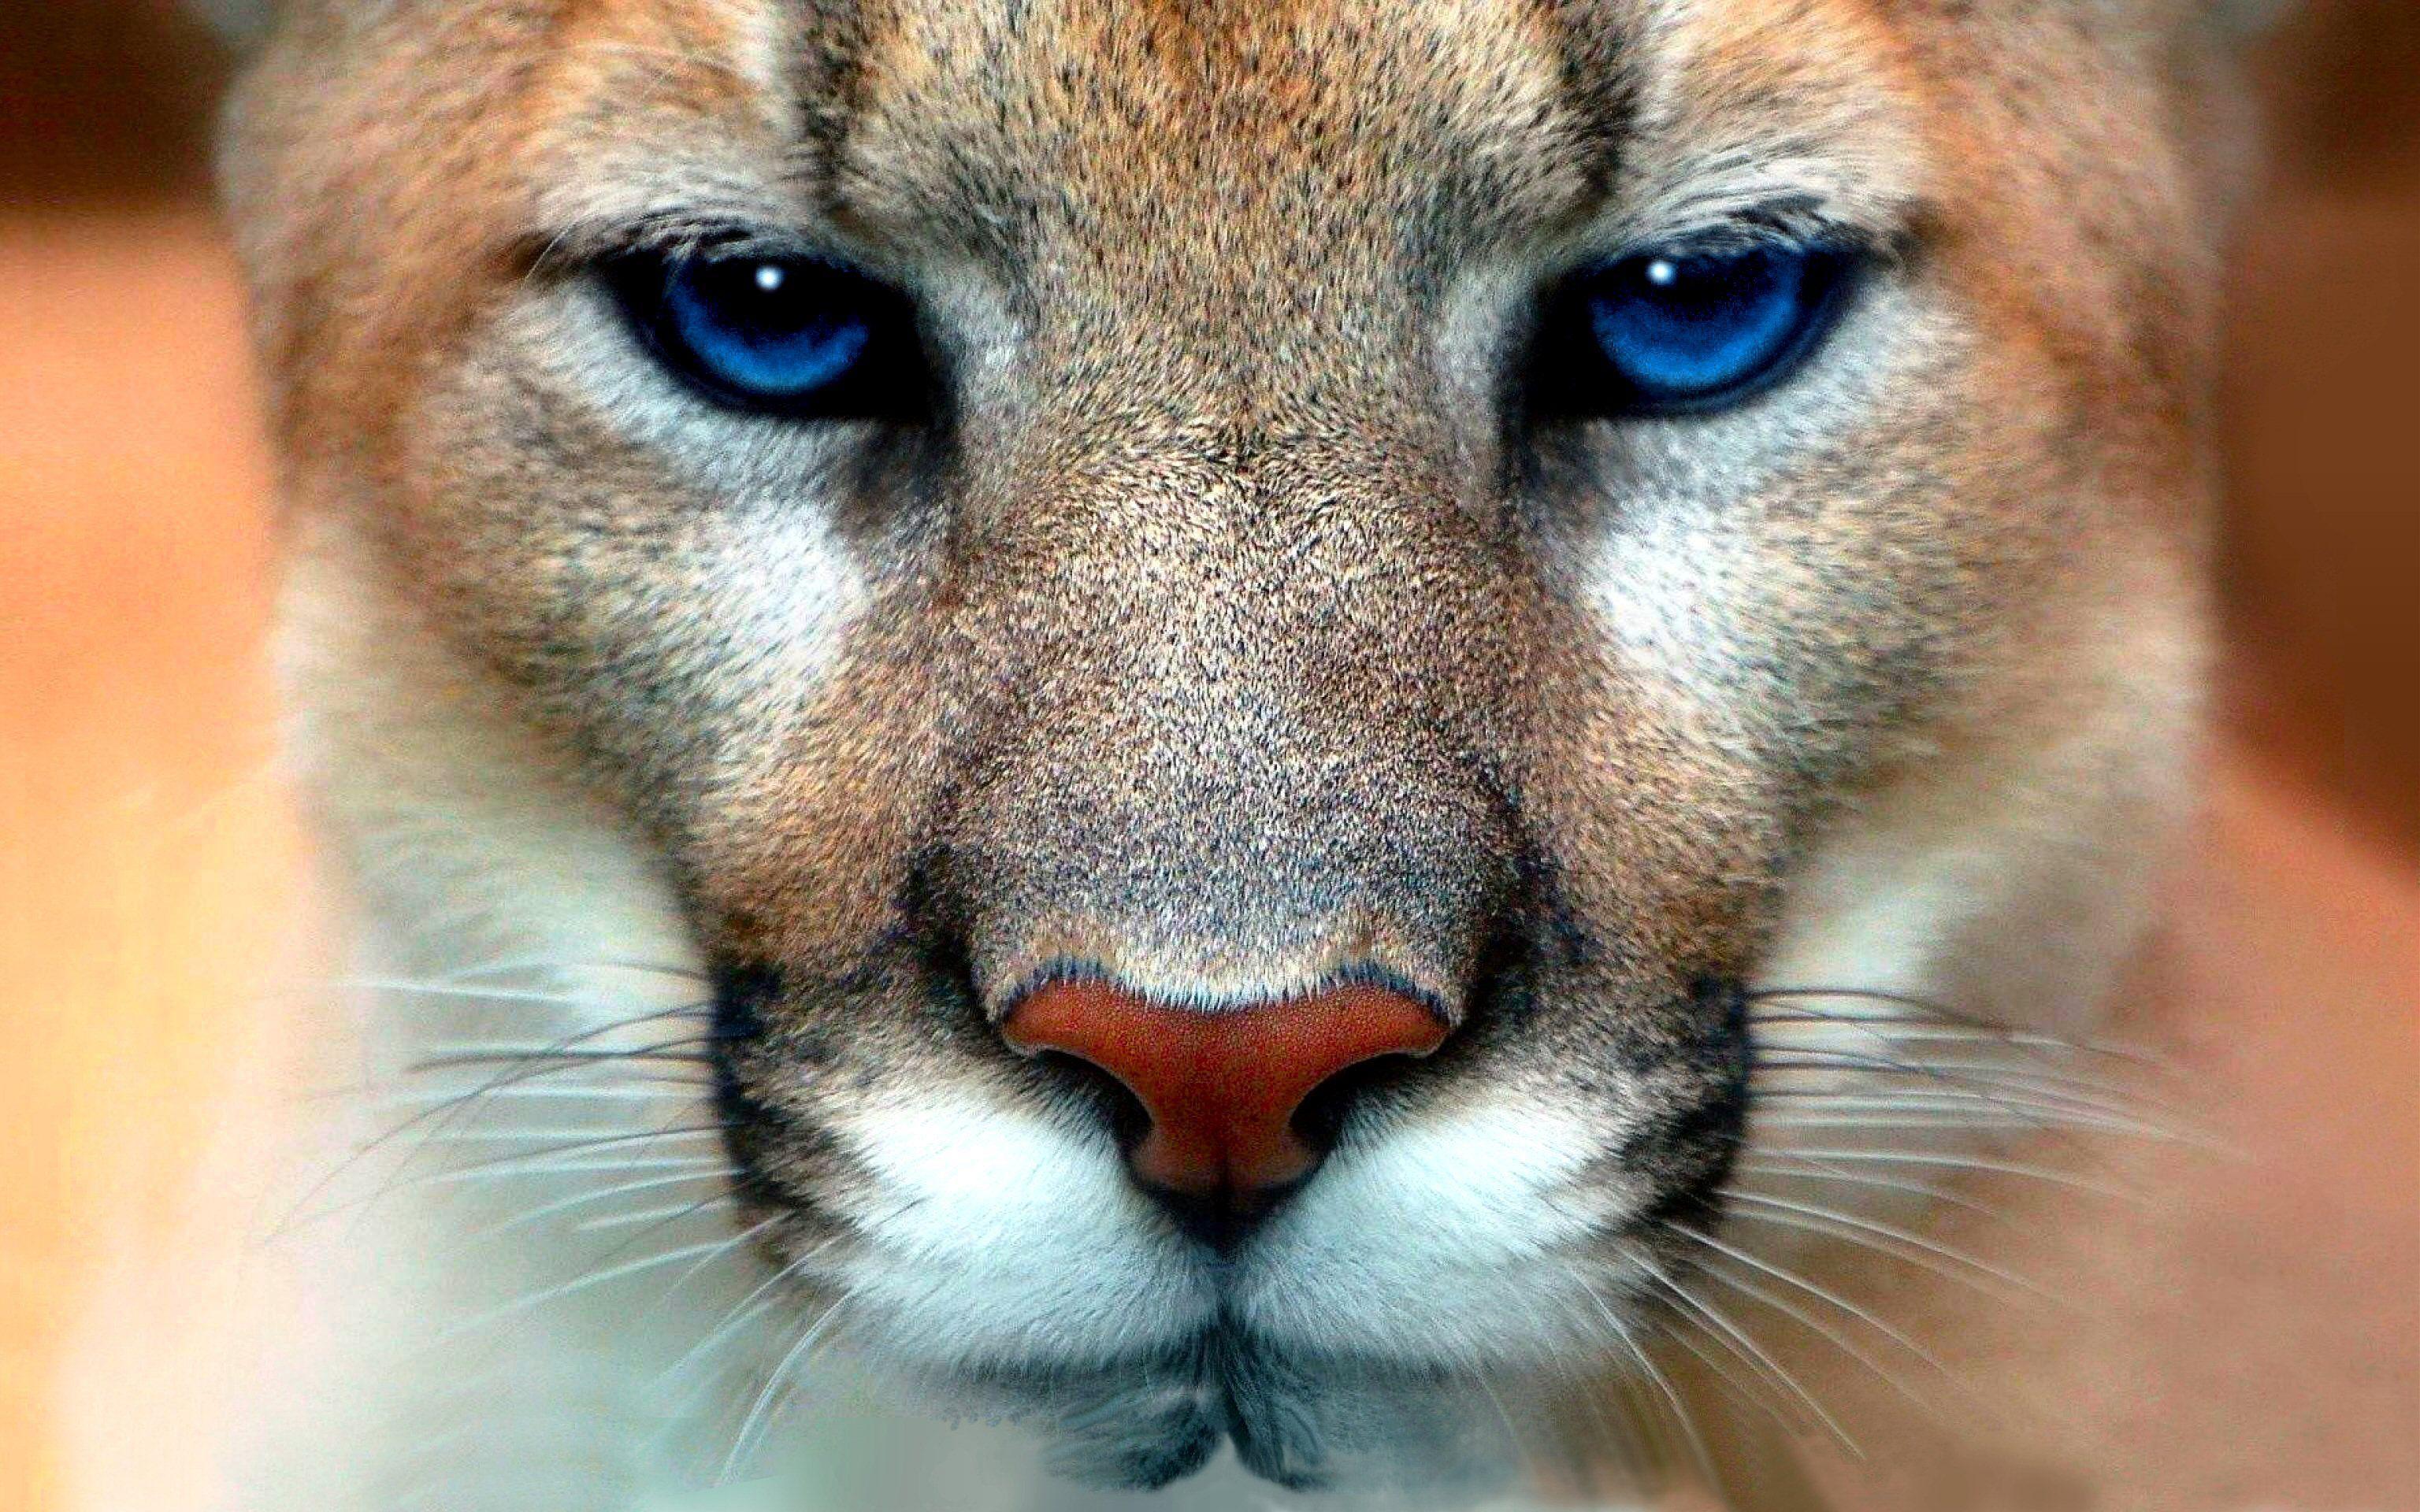 Cougar Wallpapers